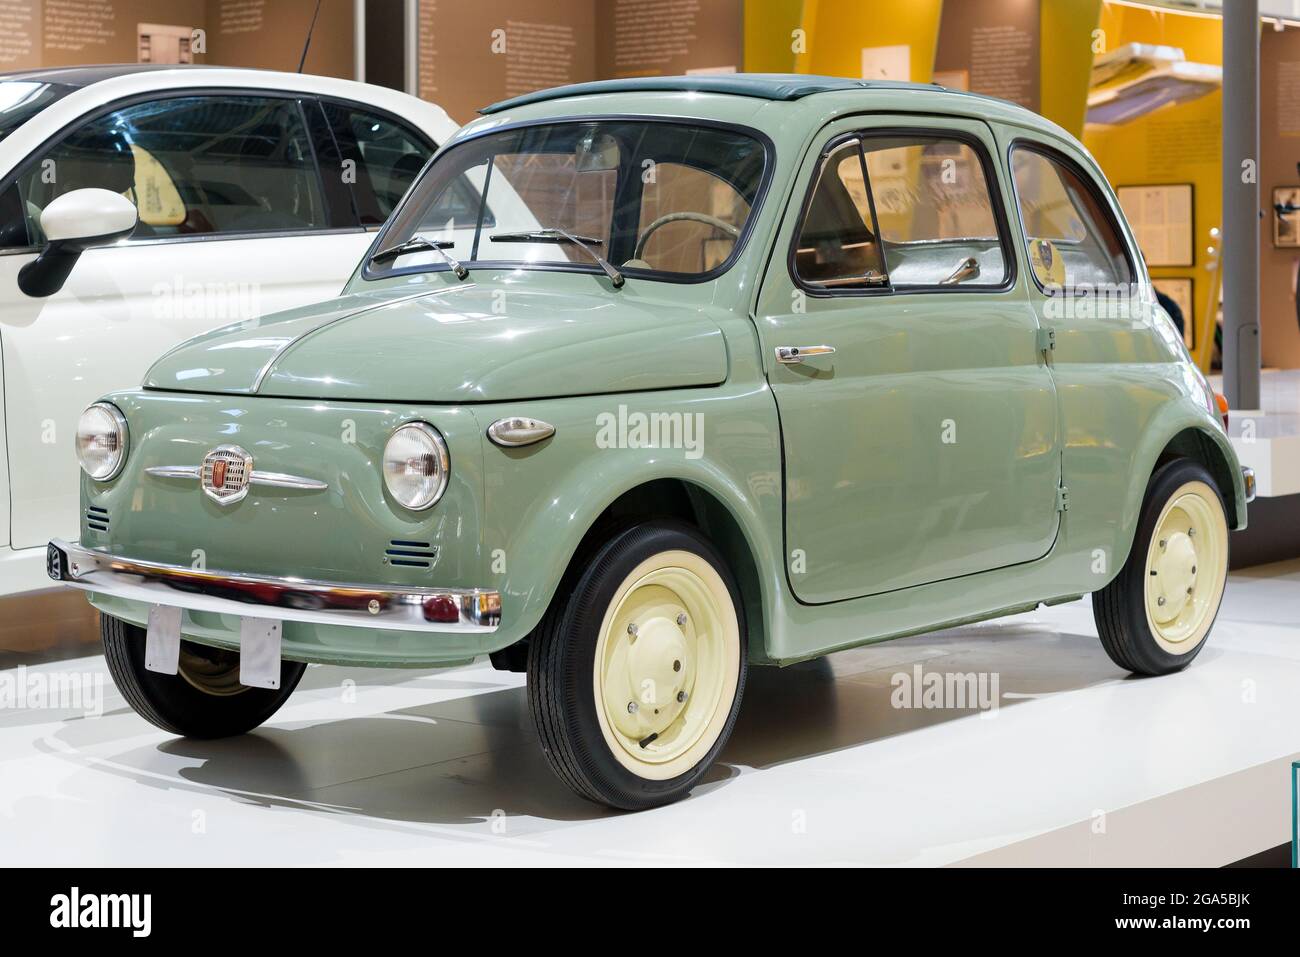 Green 1957 original Fiat 500 car on display in a motor showroom, an iconic vintage Italian vehicle in pristine condition Stock Photo